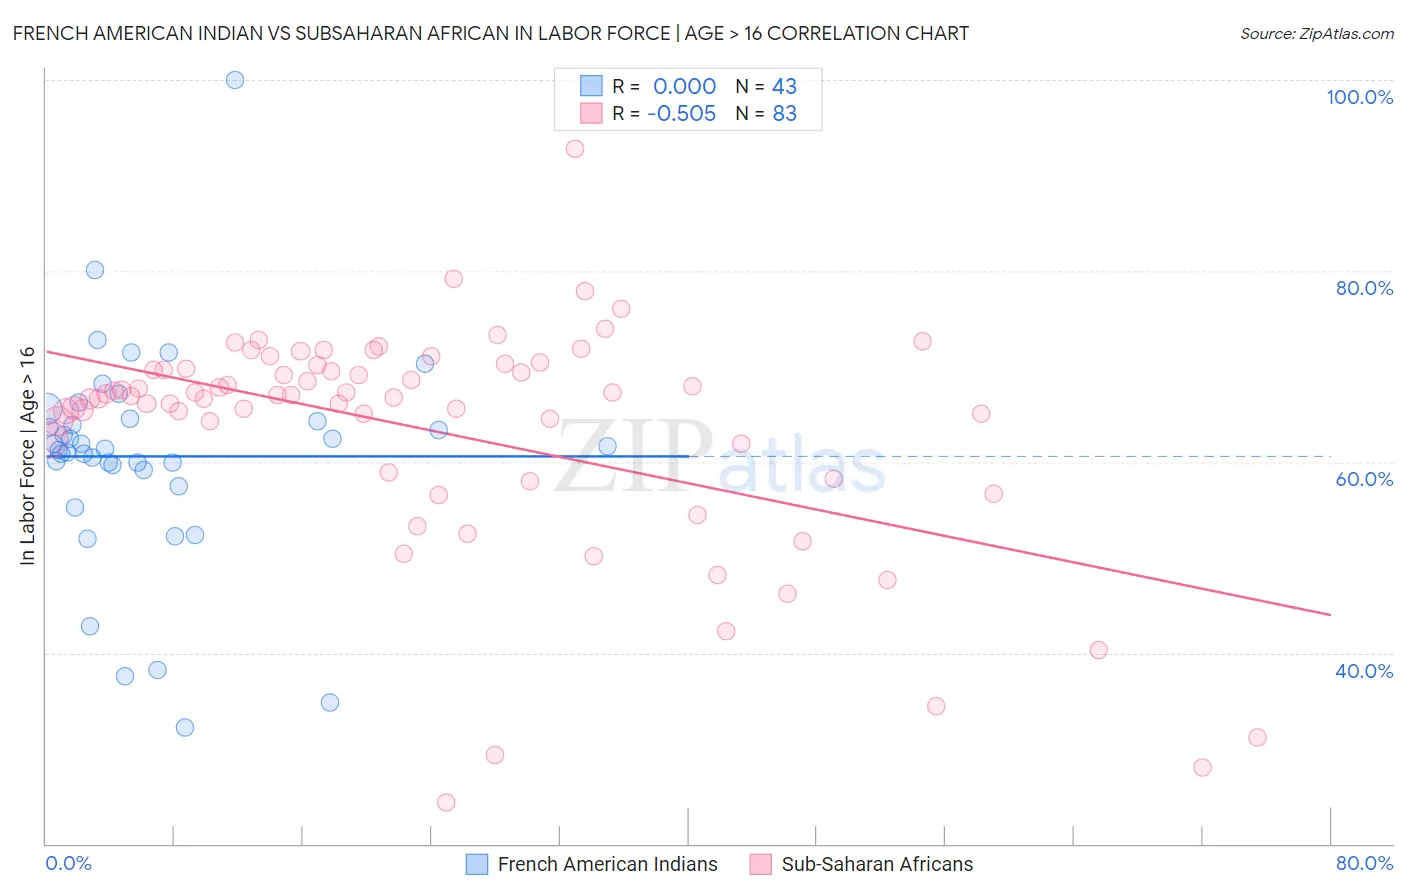 French American Indian vs Subsaharan African In Labor Force | Age > 16